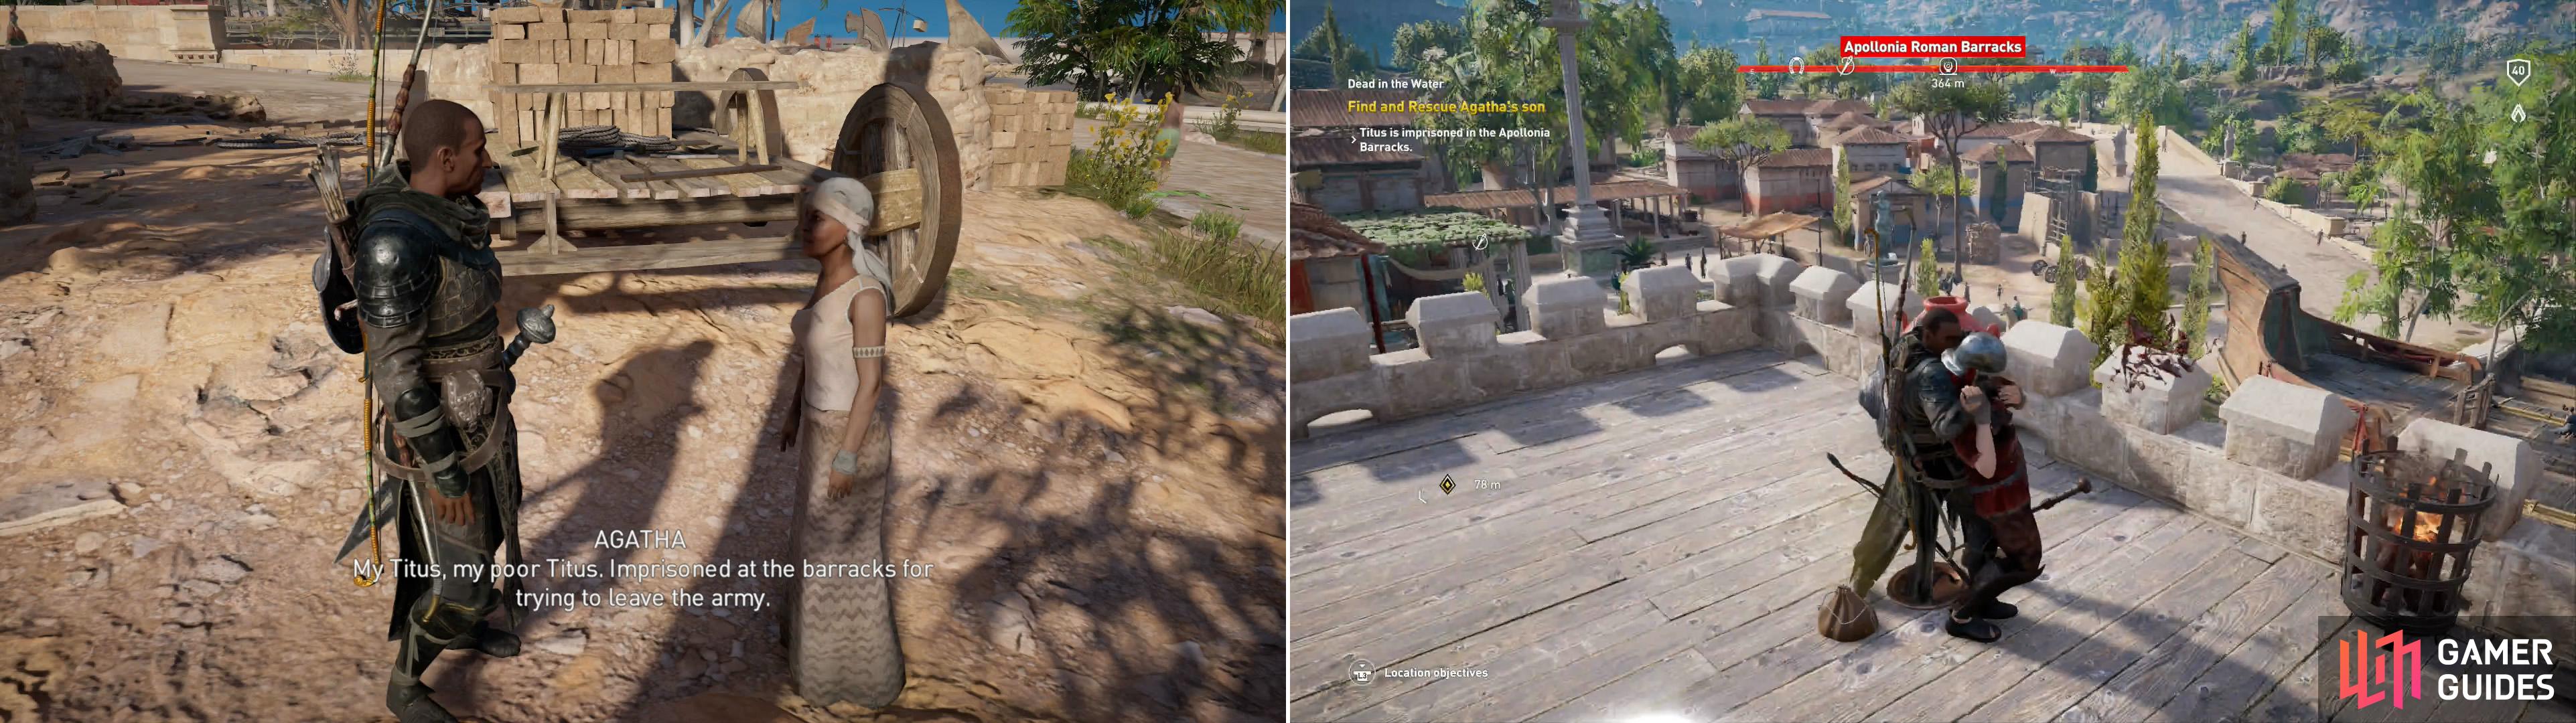 Talk to Agatha to start the quest (left) then start clearing out the Apollonia Roman Barracks (right).